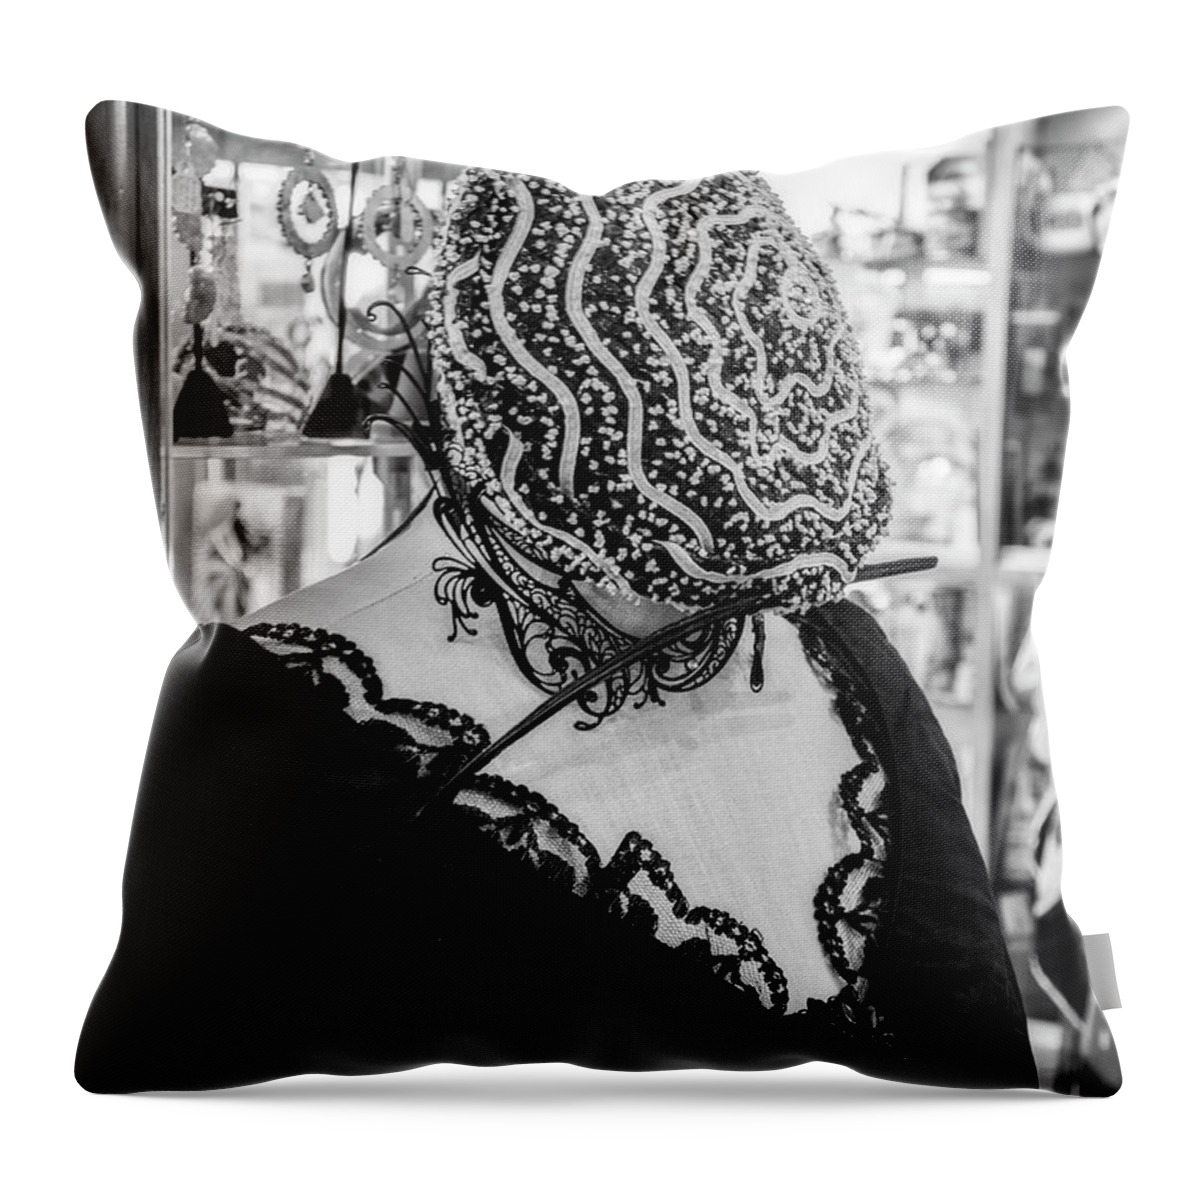 Vintage Fashion Throw Pillow featuring the photograph Vintage Fashion by Sandra Selle Rodriguez